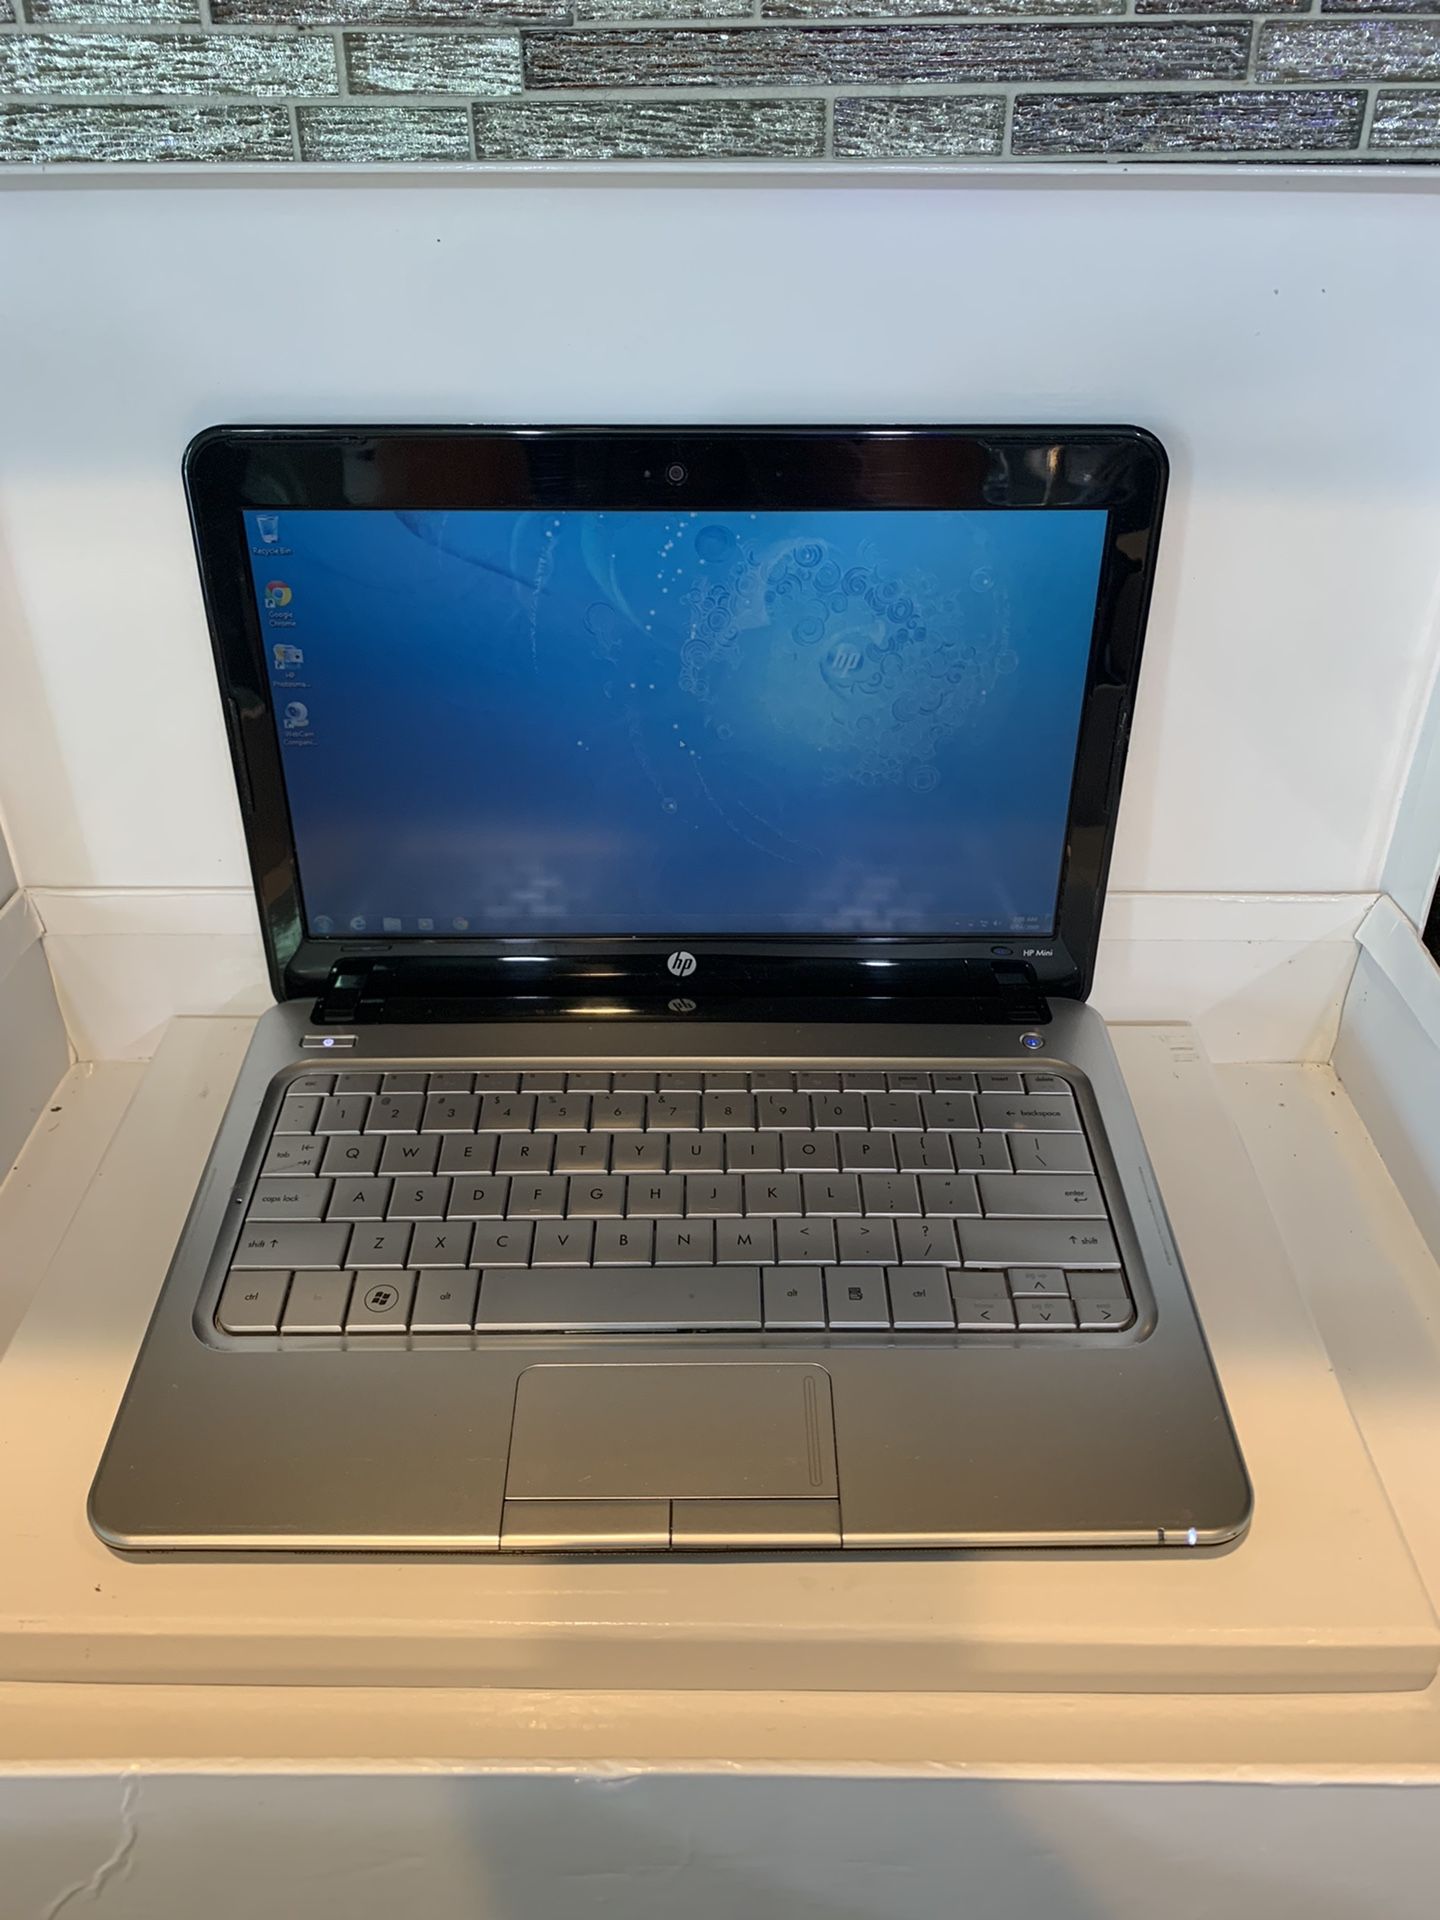 11” HP Mini 311 Laptop with HDMI, Webcam, Windows 7 and Microsoft Office